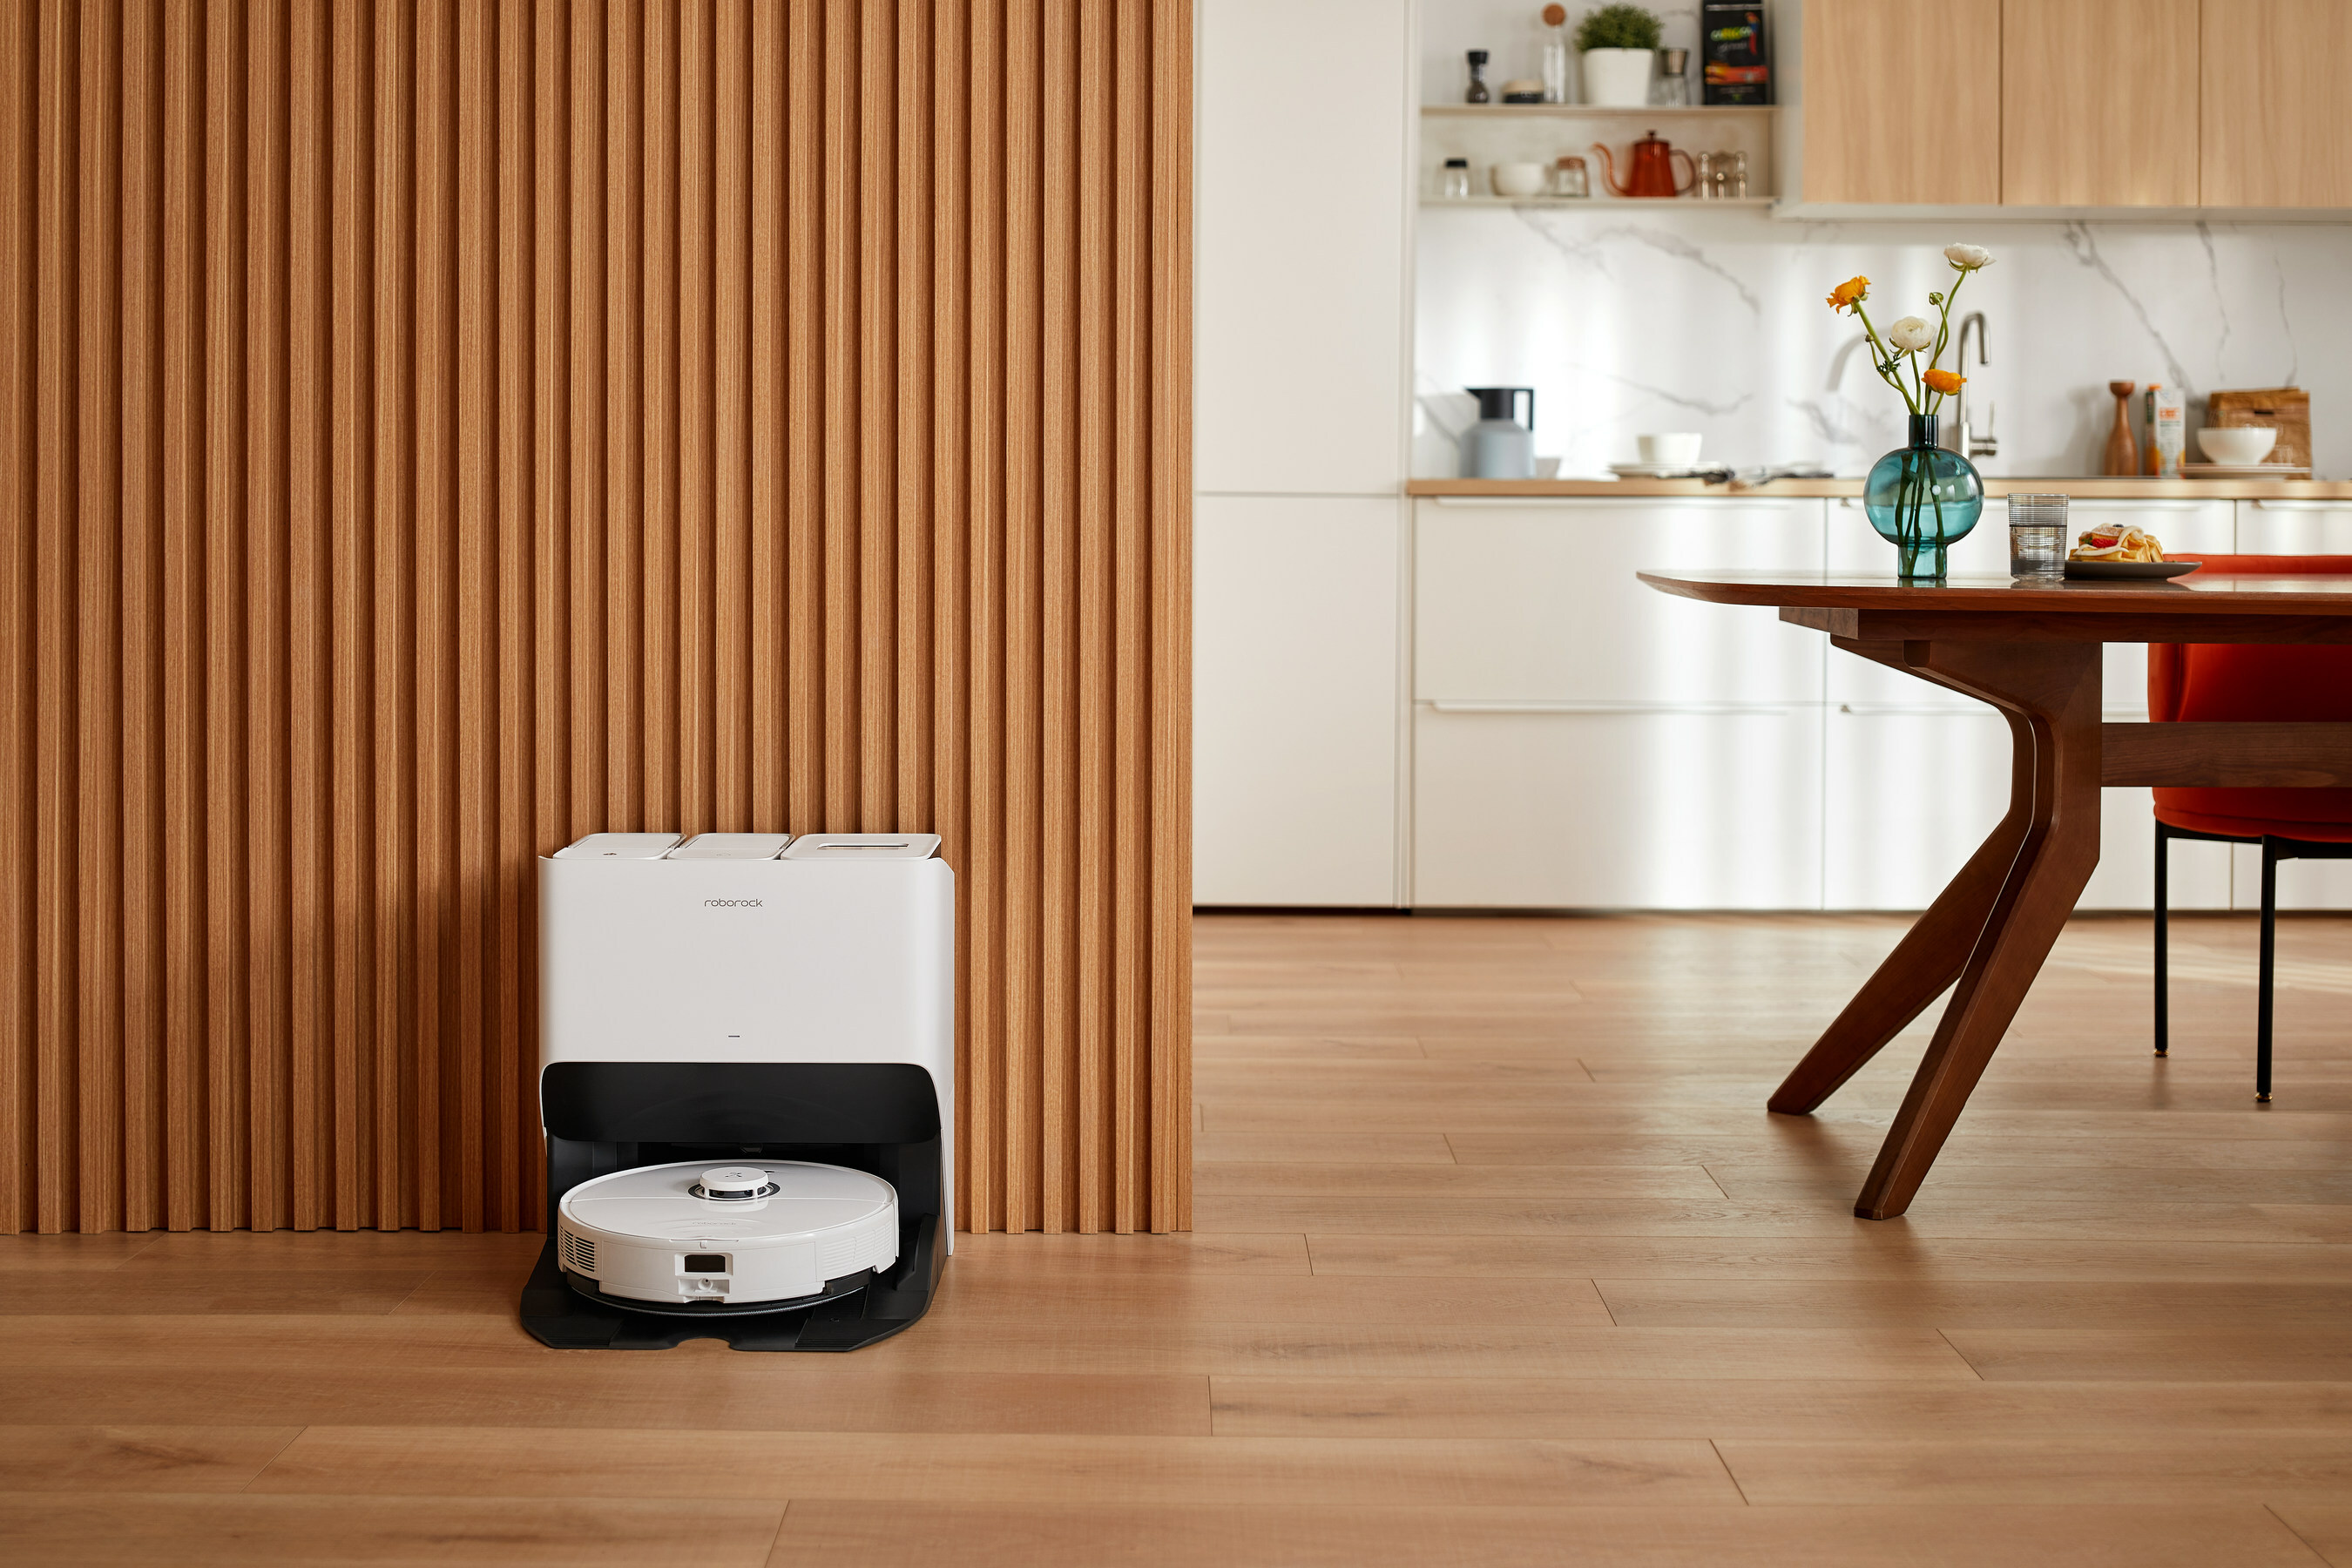 Roborock S8 Series robot vacuums include 3 models for effective 1-stop home  cleaning » Gadget Flow